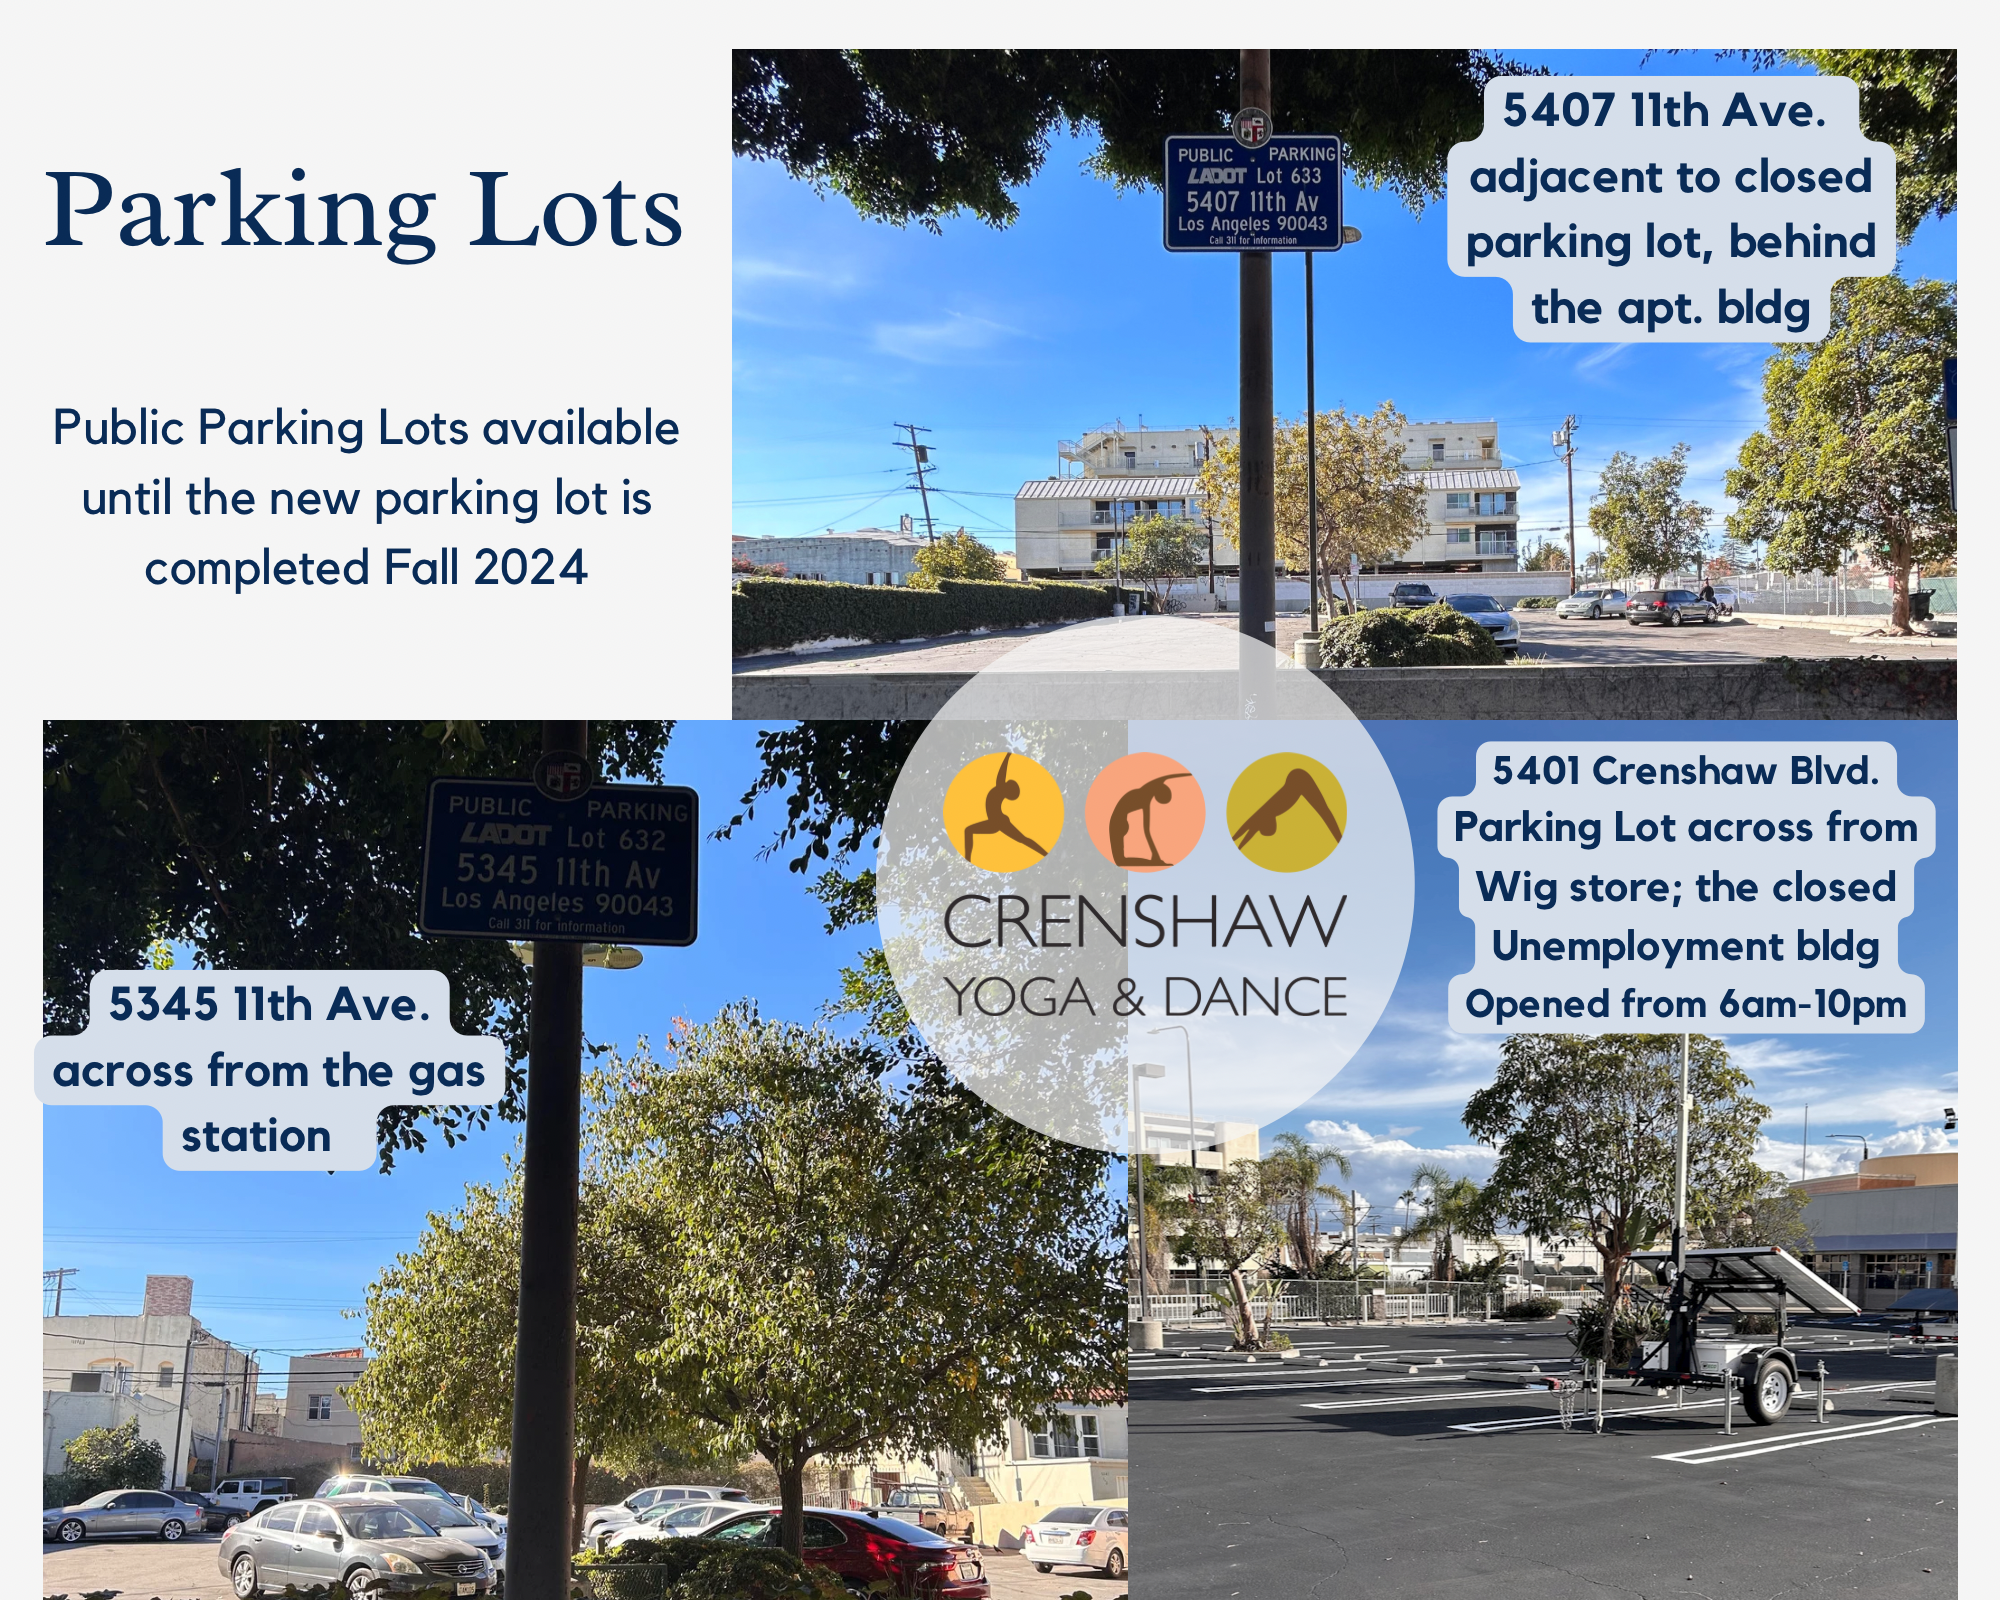 Public Parking lots available during the reconstruction of the  parking lot on Crenshaw Blvd./54th St.